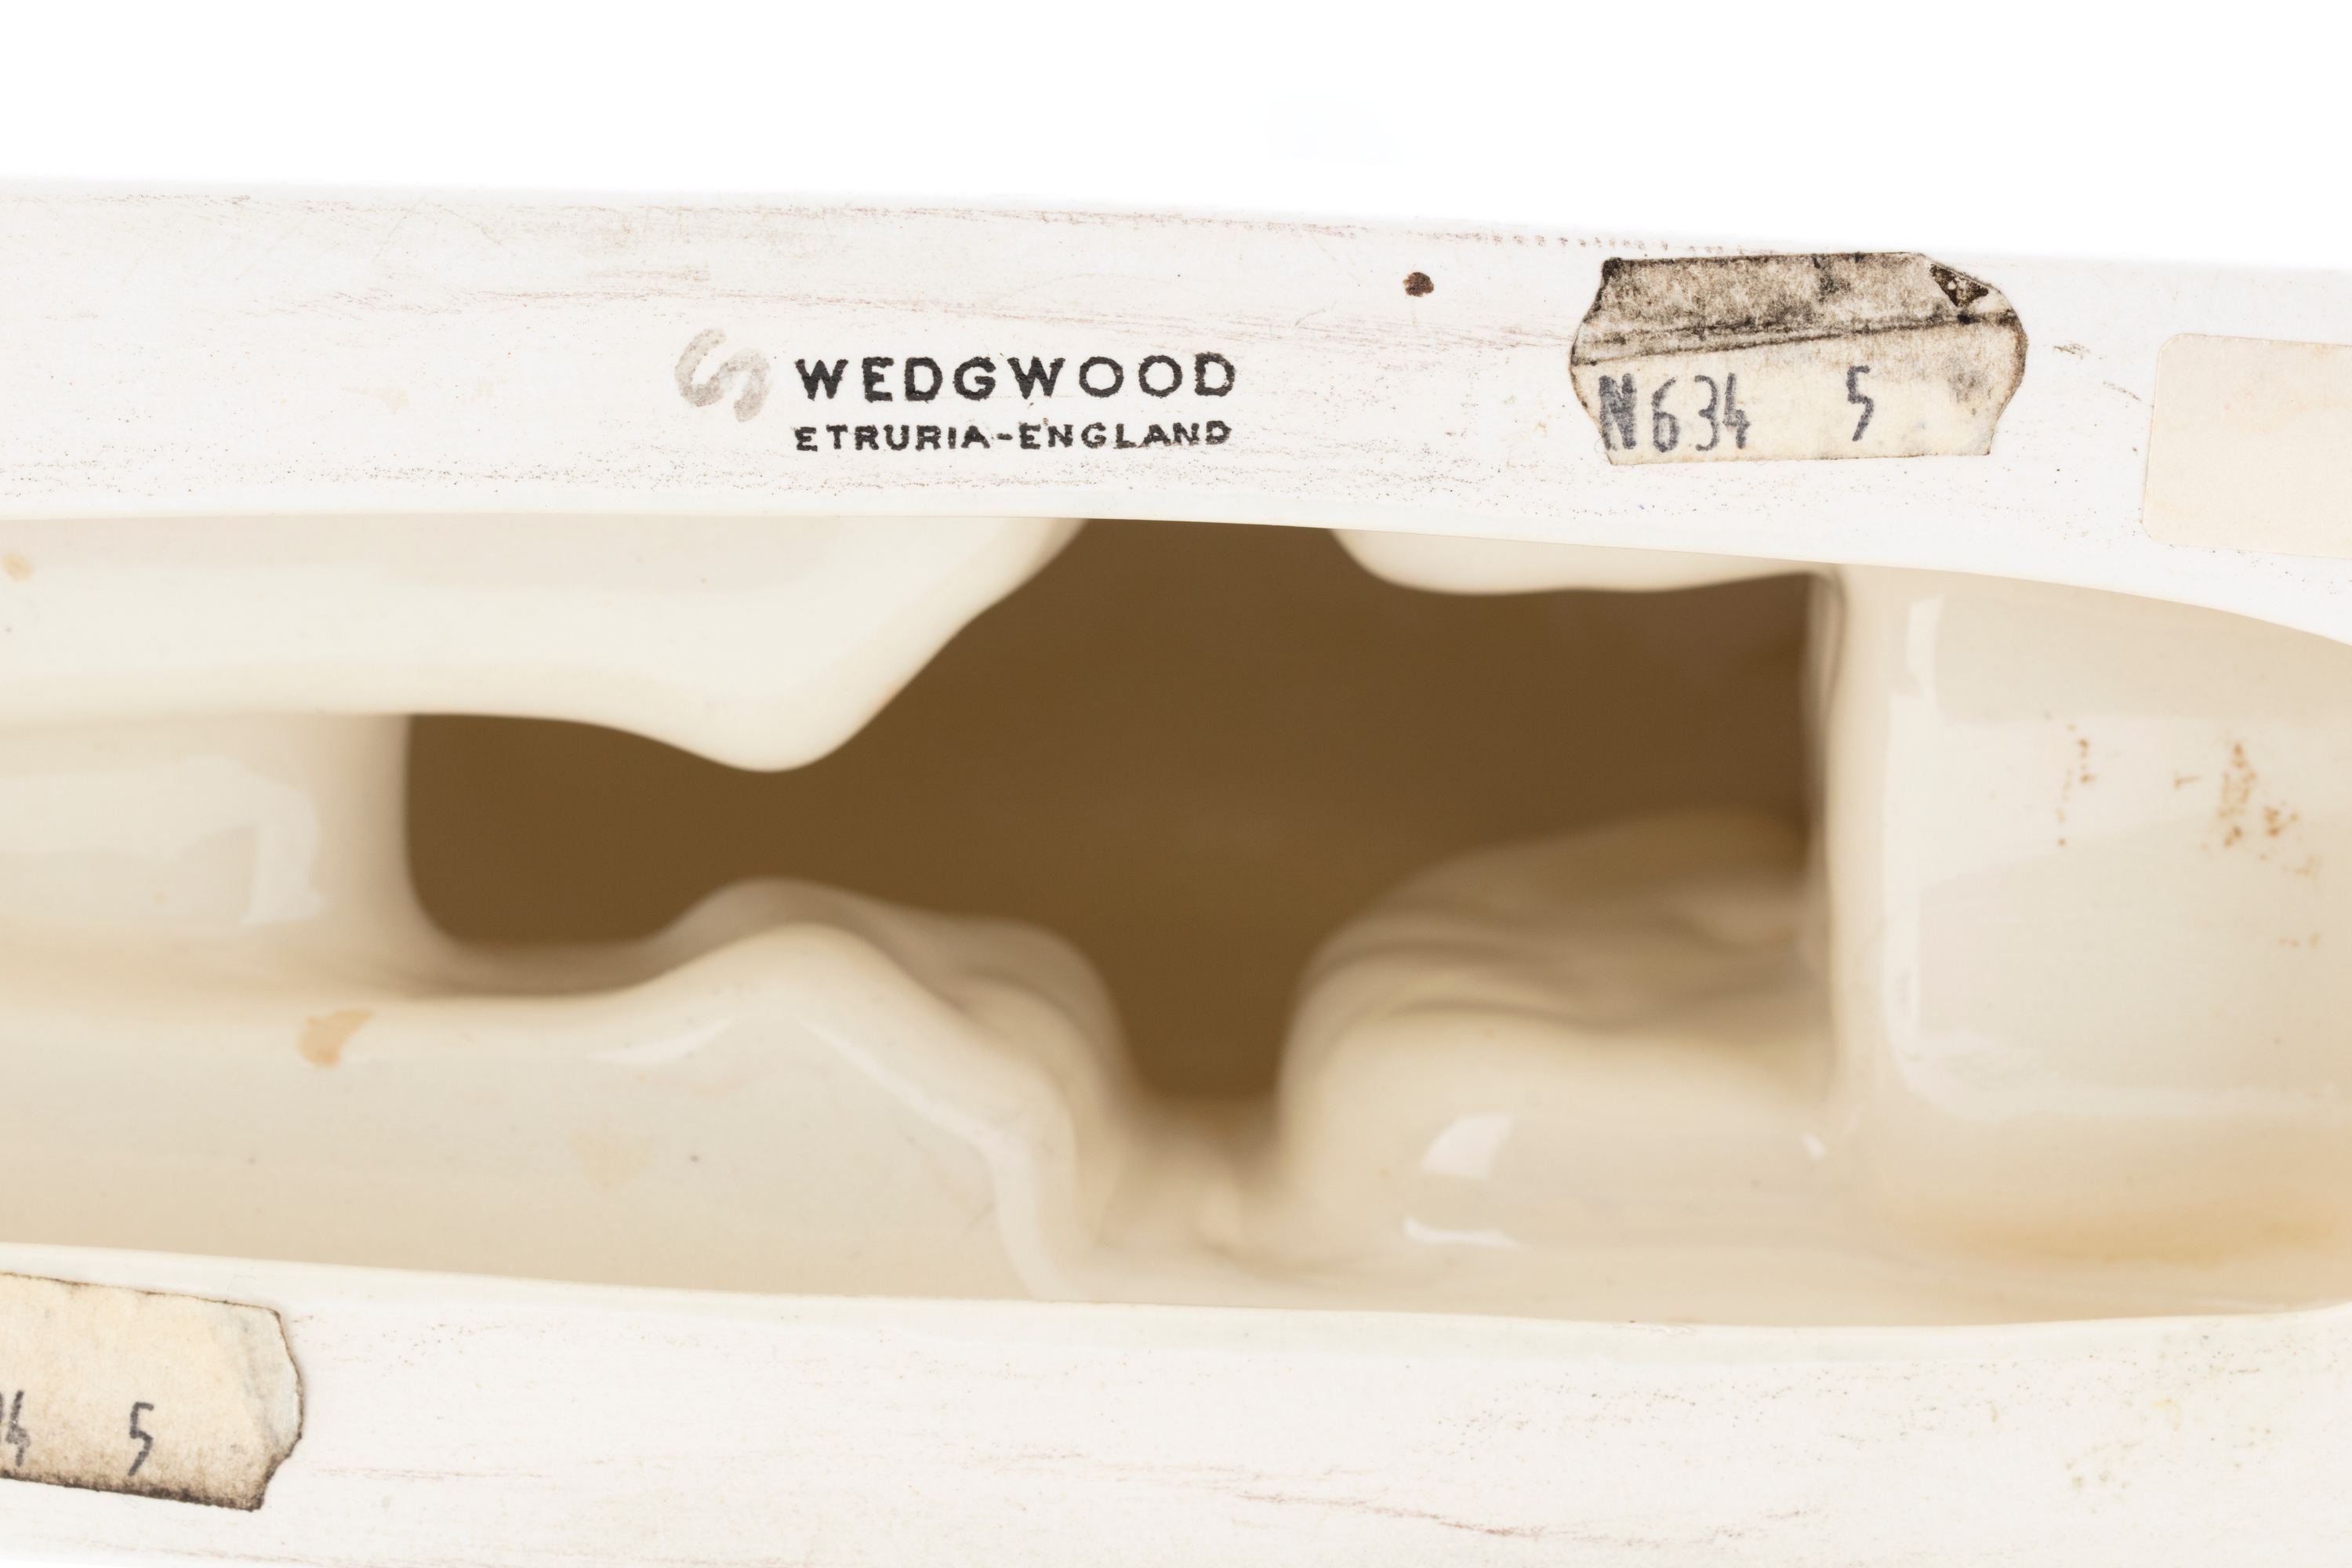 Underside of a white earthenware figure showing the printed black text ‘WEDGWOOD / ETRURIA-ENGLAND’.